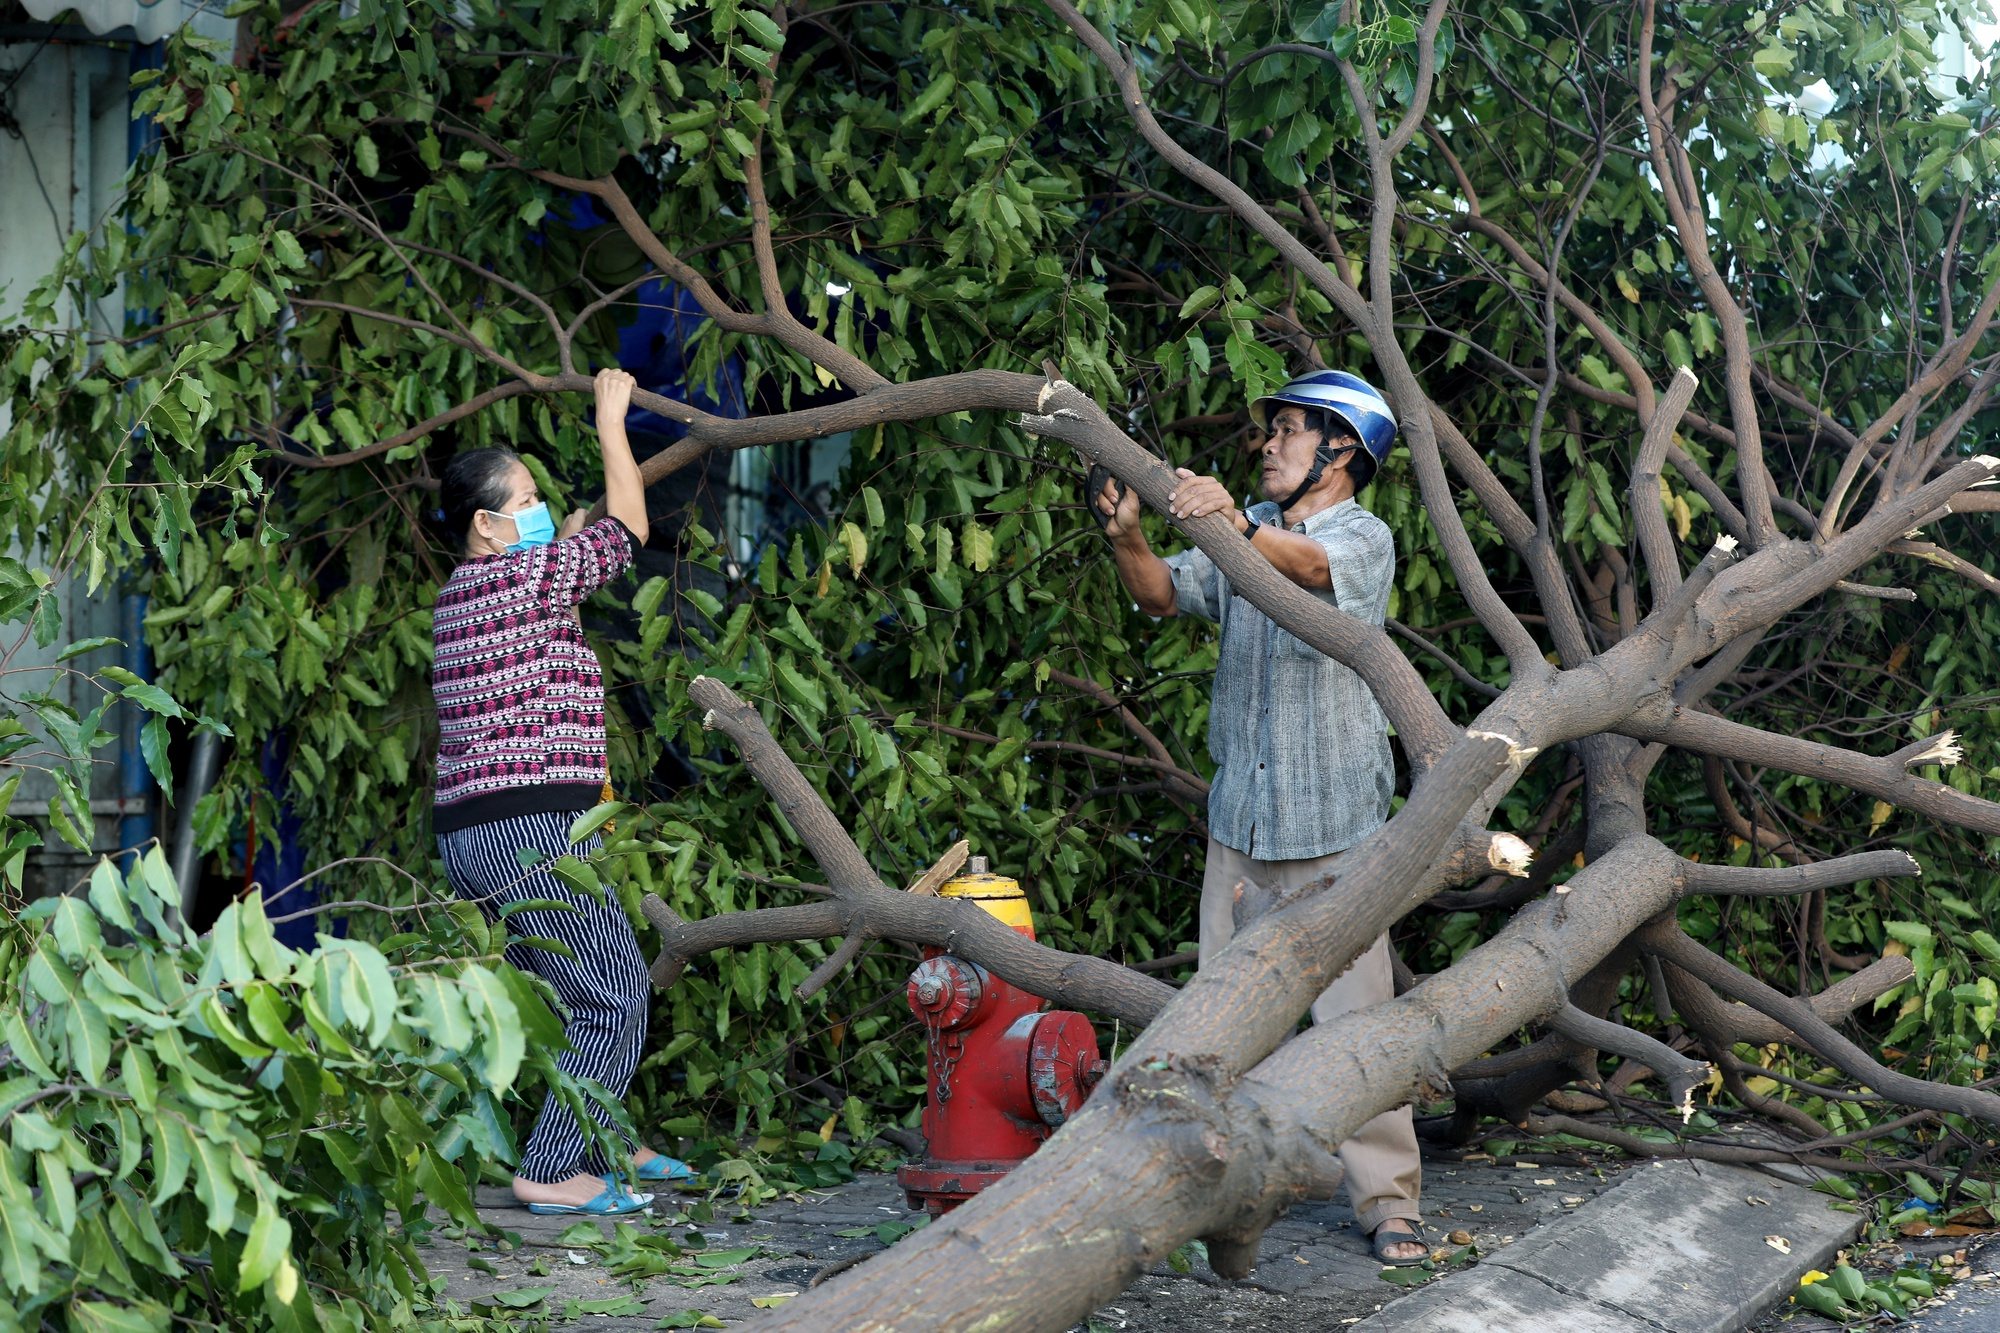 epa08782356 People remove a fallen tree from a street in the aftermath of Typhoon Molave, in Da Nang, Vietnam, 29 October 2020. According to local media reports, at least 13 people have been killed and dozens are missing after torrential rains from Typhoon Molave triggered landslides in parts of central Vietnam.  EPA/STR